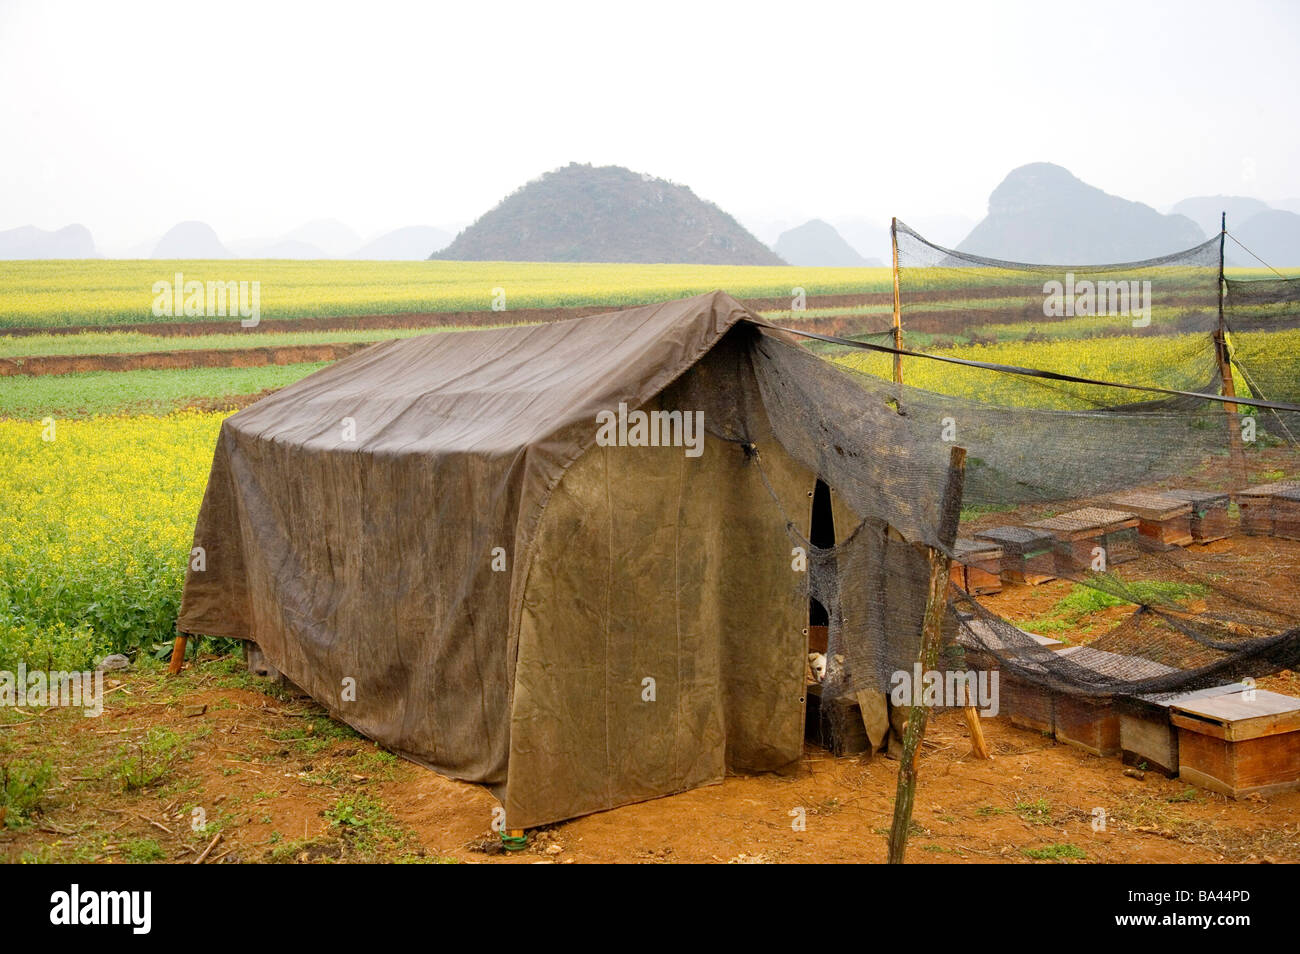 China Yunnan Province Luoping County tent Stock Photo